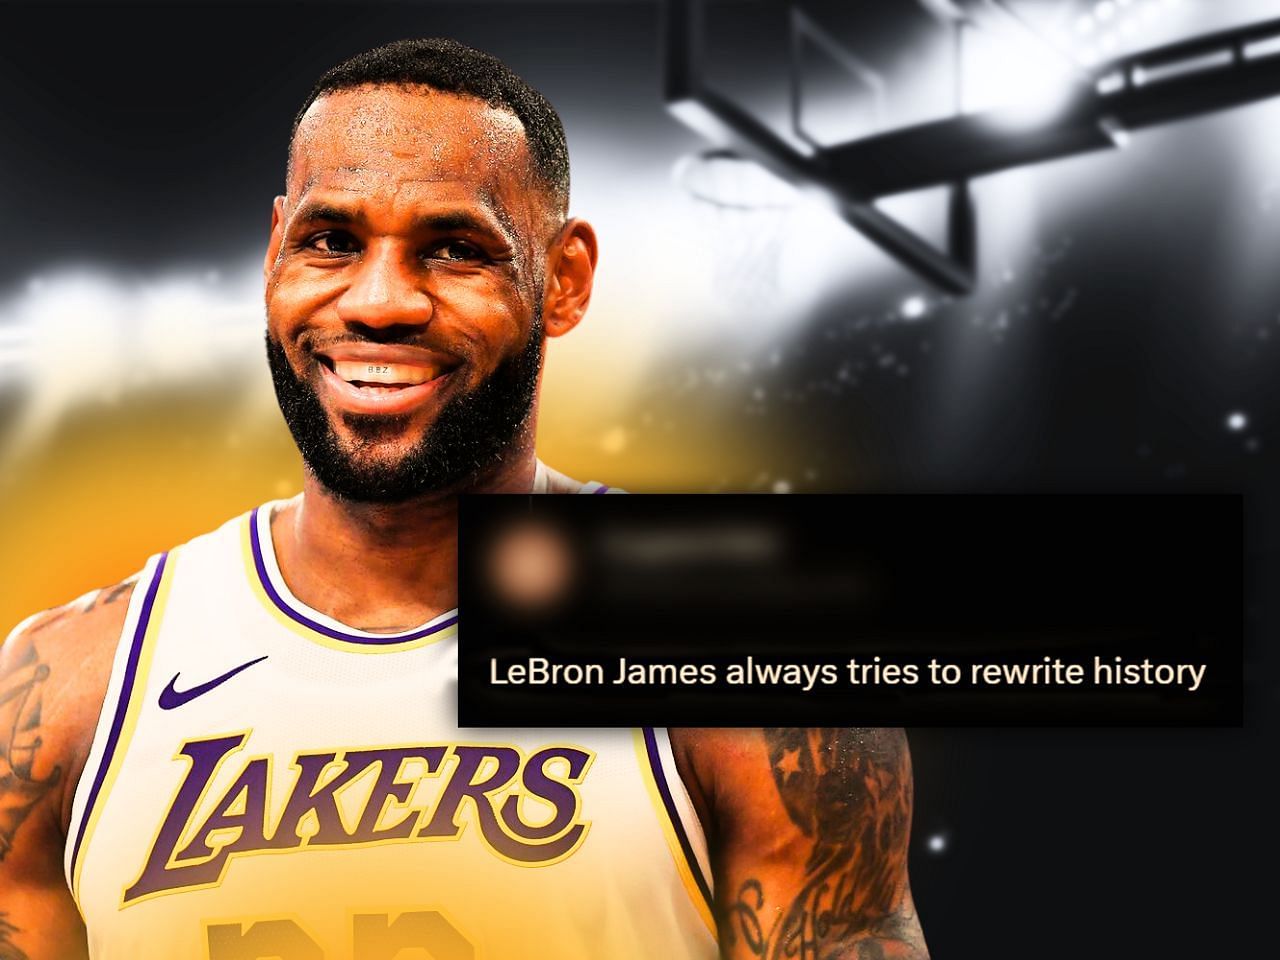 LeBron James gets roasted by fans on Twitter for NBA Bubble comment